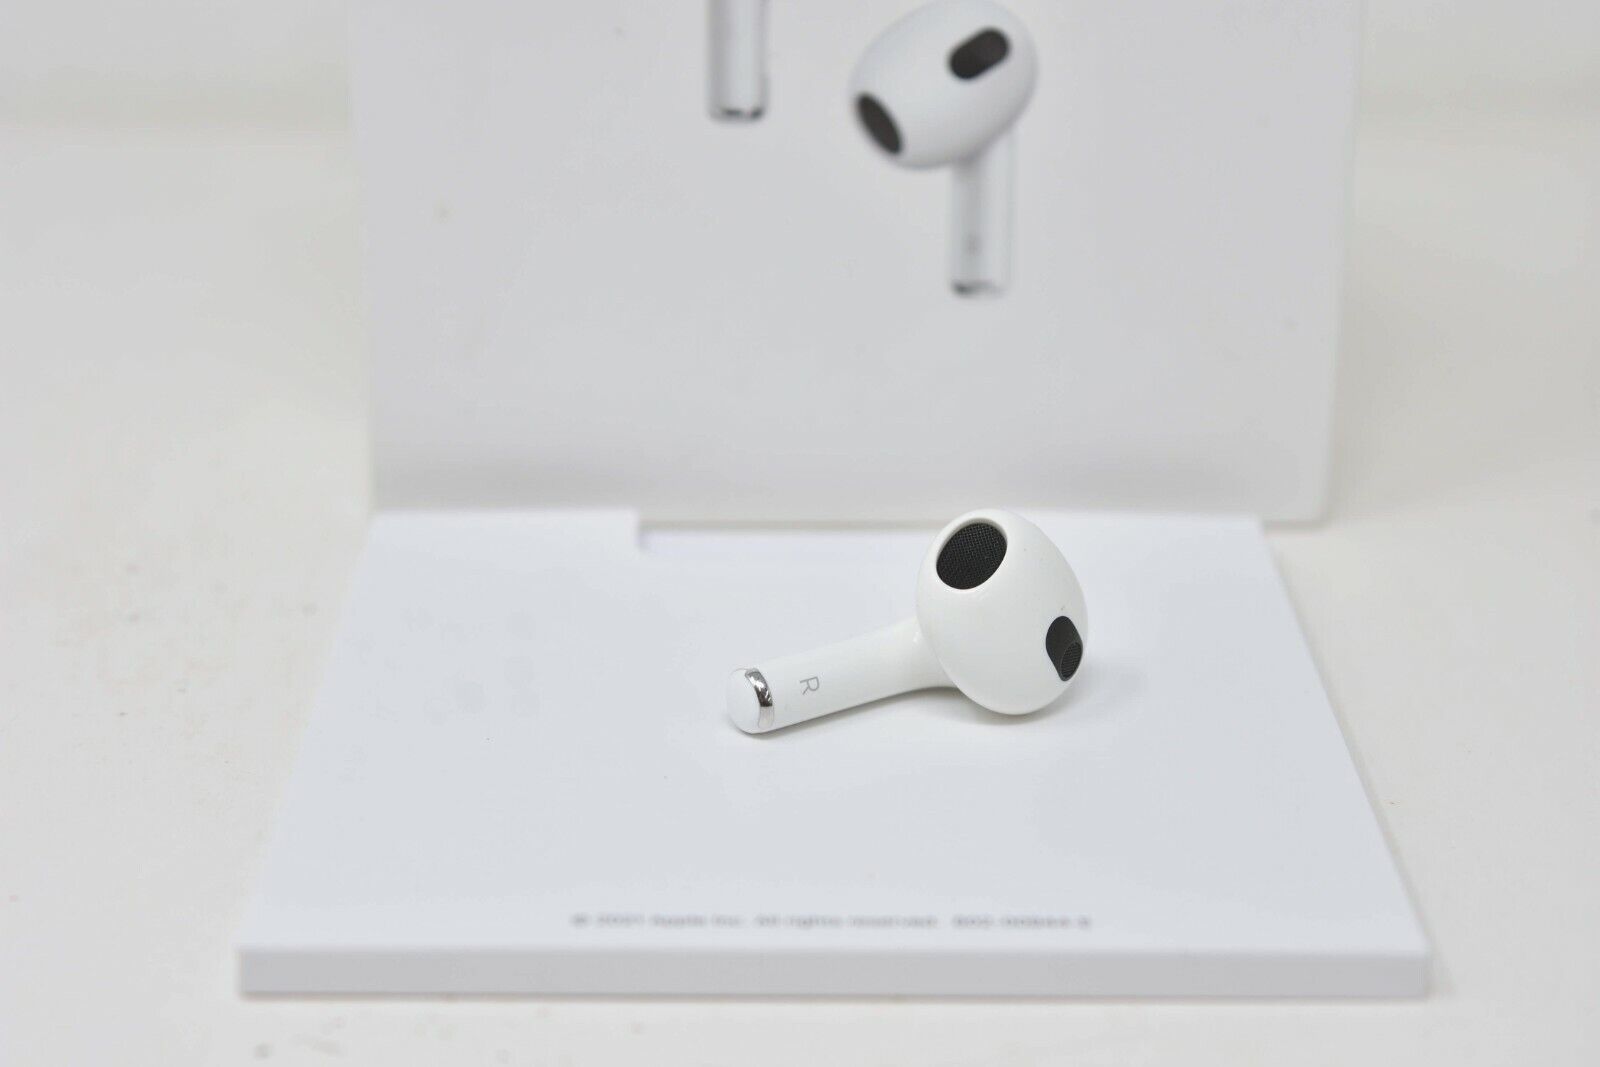 Apple Airpods 3rd Generation: (RIGHT SIDE ONLY) for 